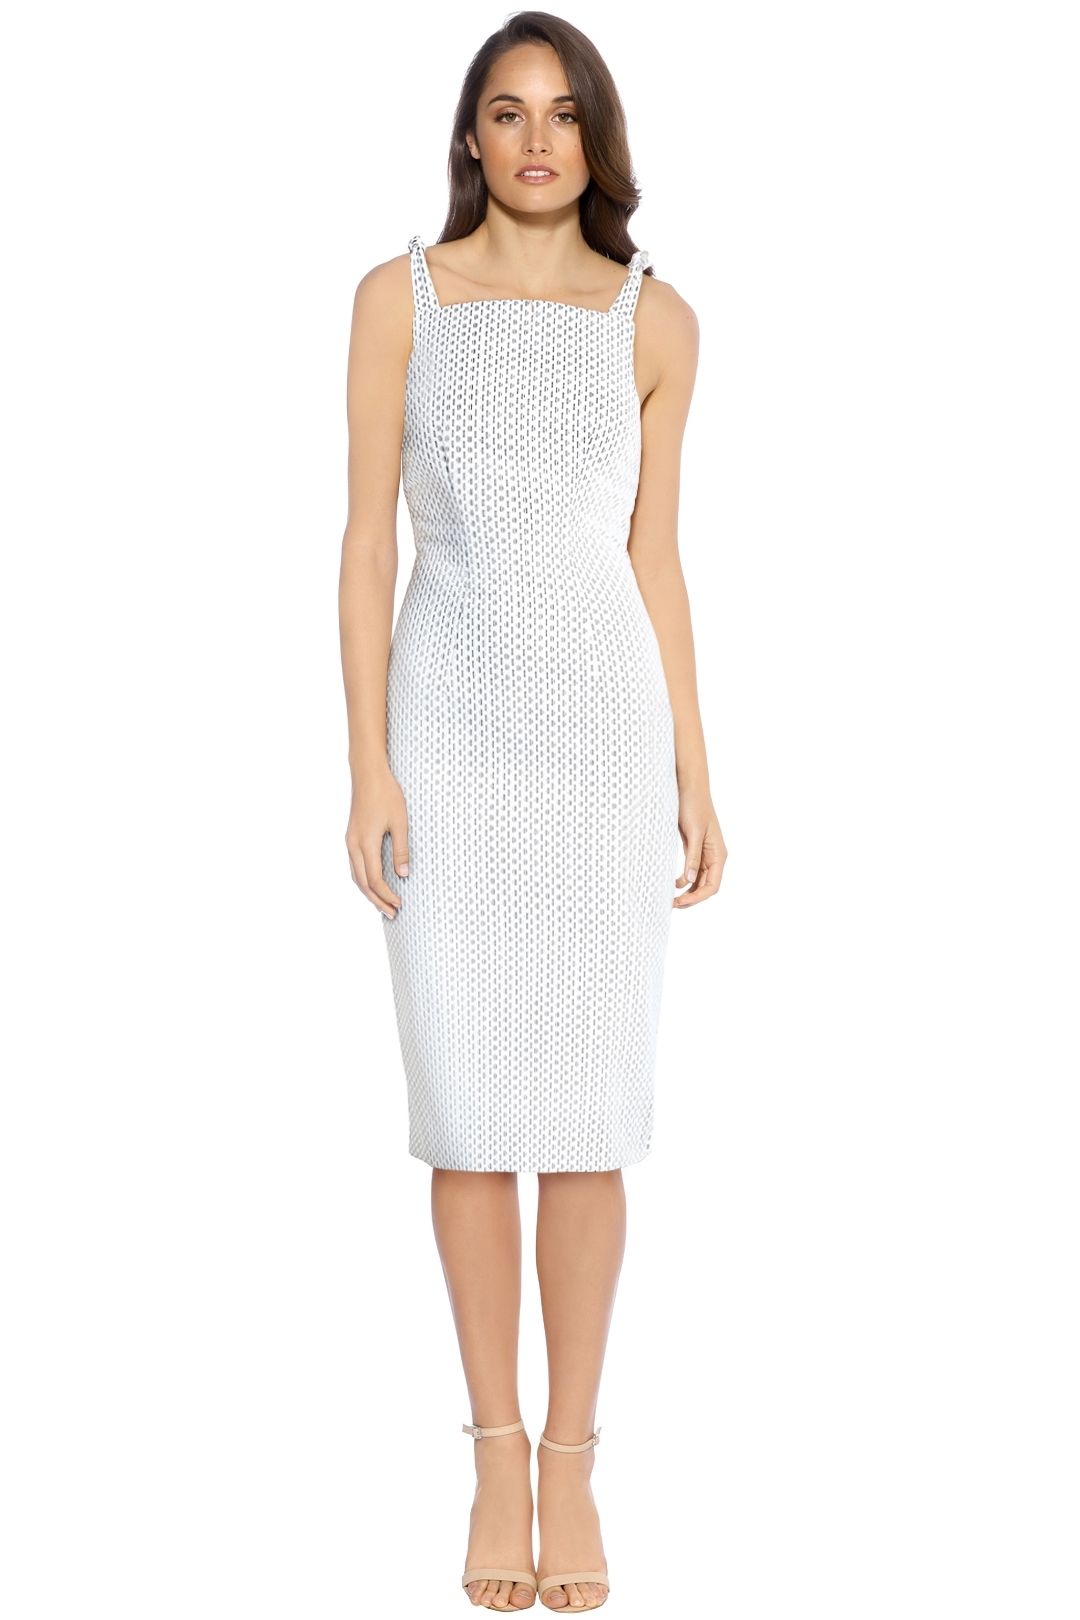 By Johnny - Knot Neck Link Dress - White - Front